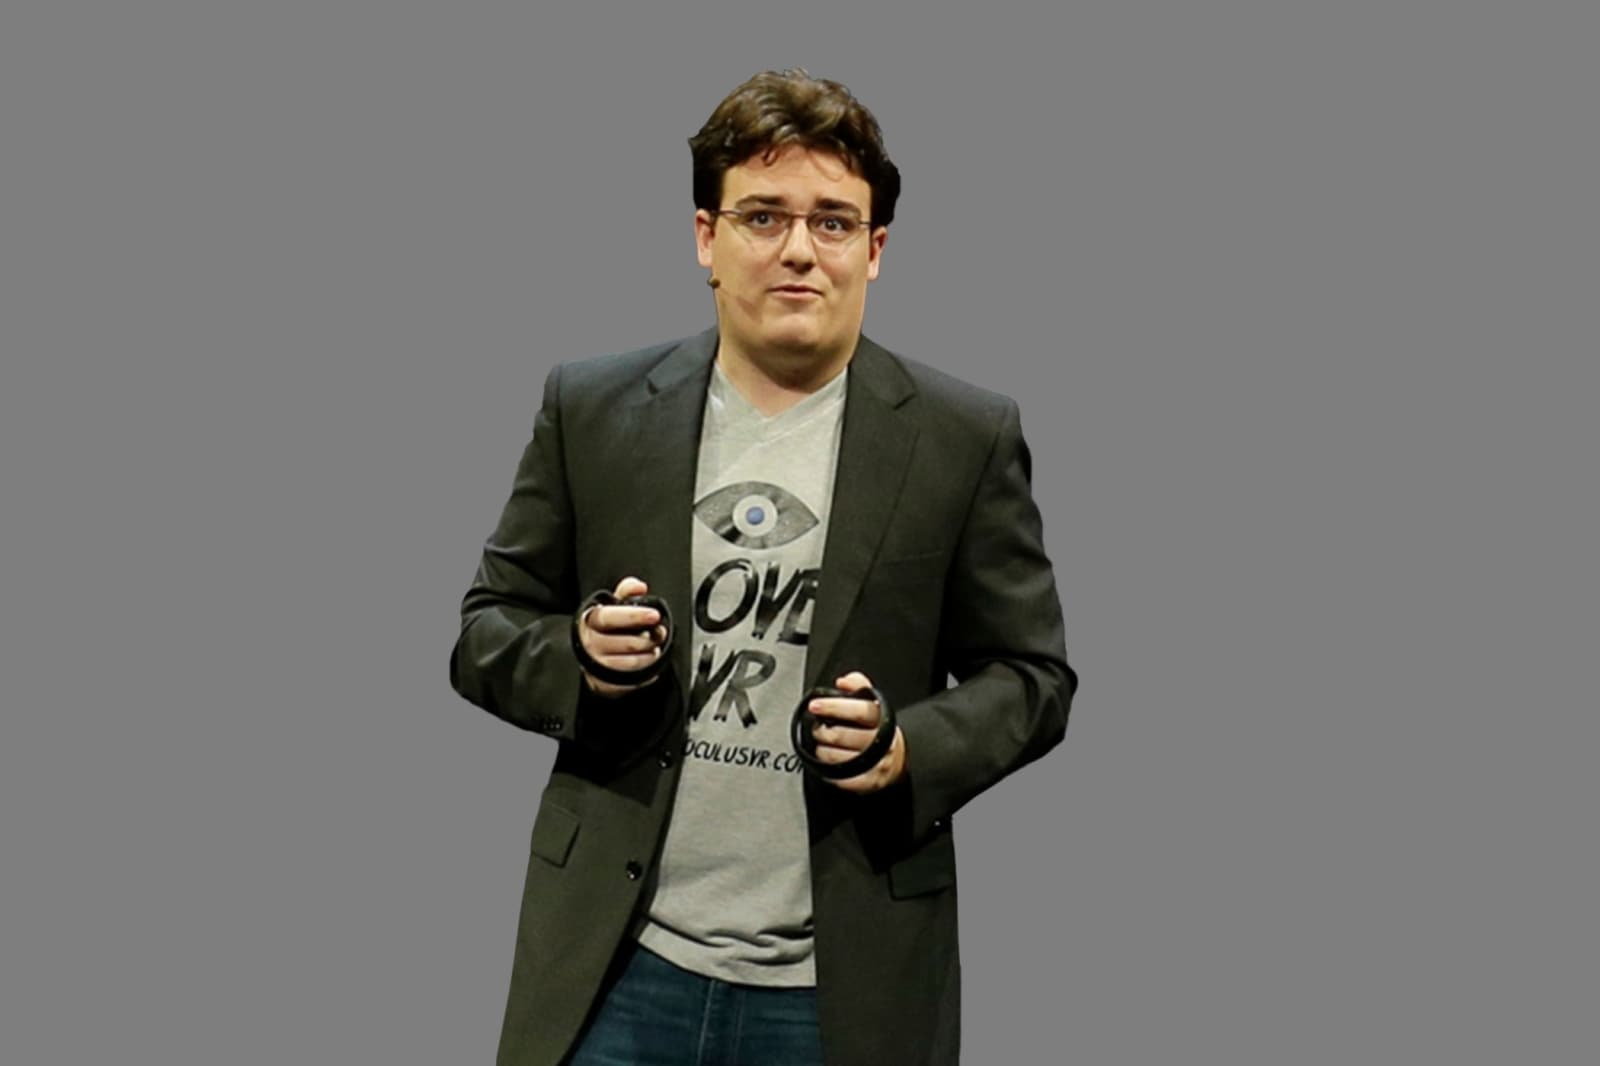 Facebook reportedly pressured Palmer Luckey to support a politician1600 x 1066